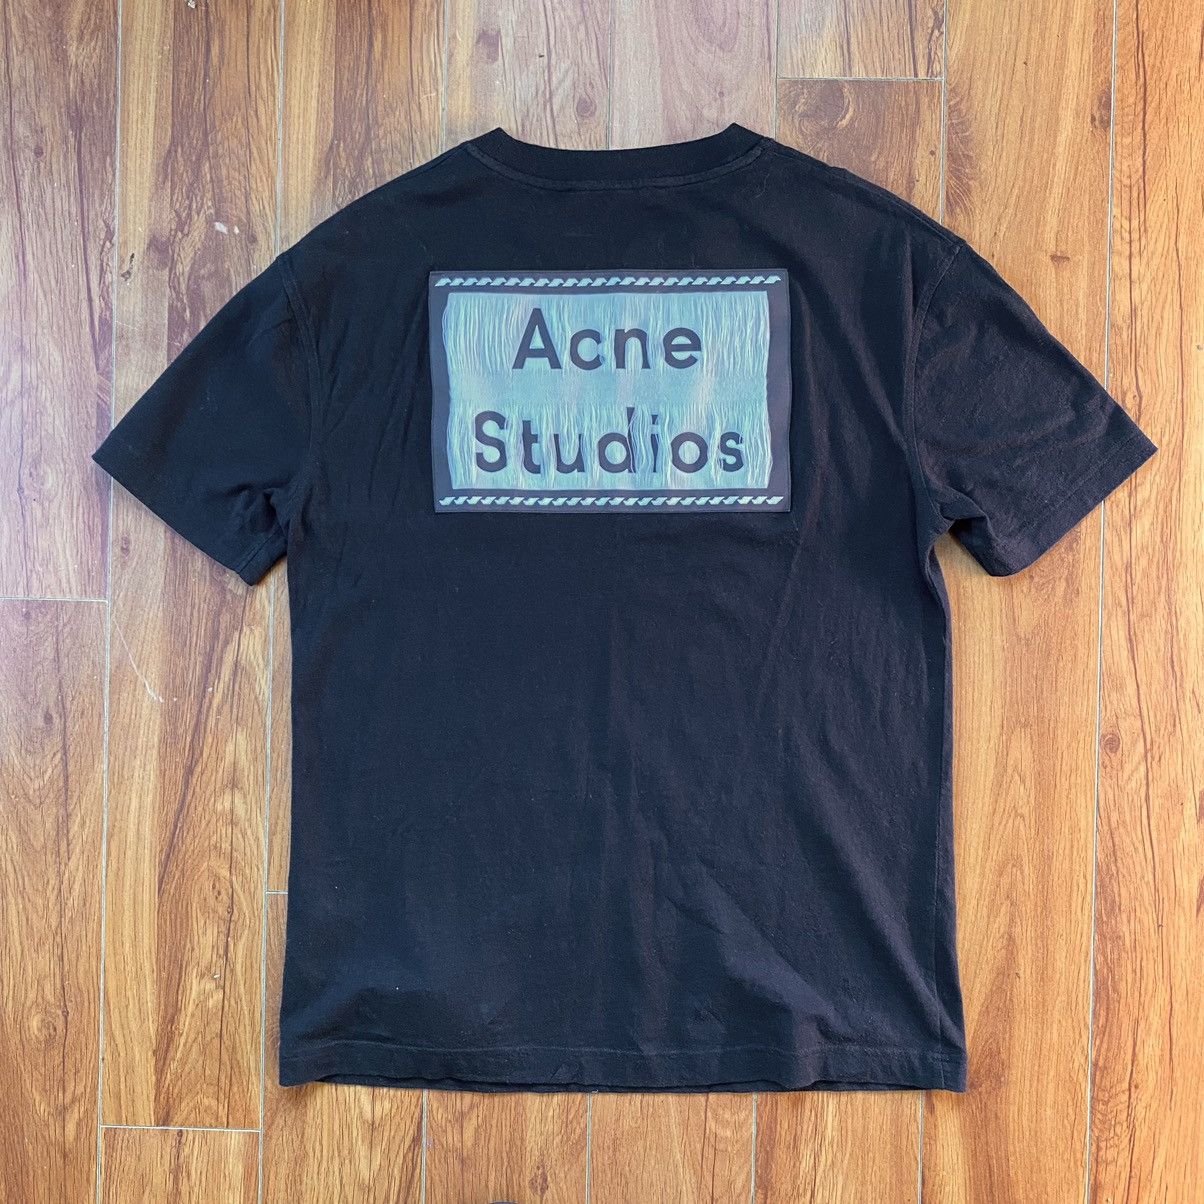 Acne Studios Acne Studios Back Embroidered Graphic T-Shirt | Grailed